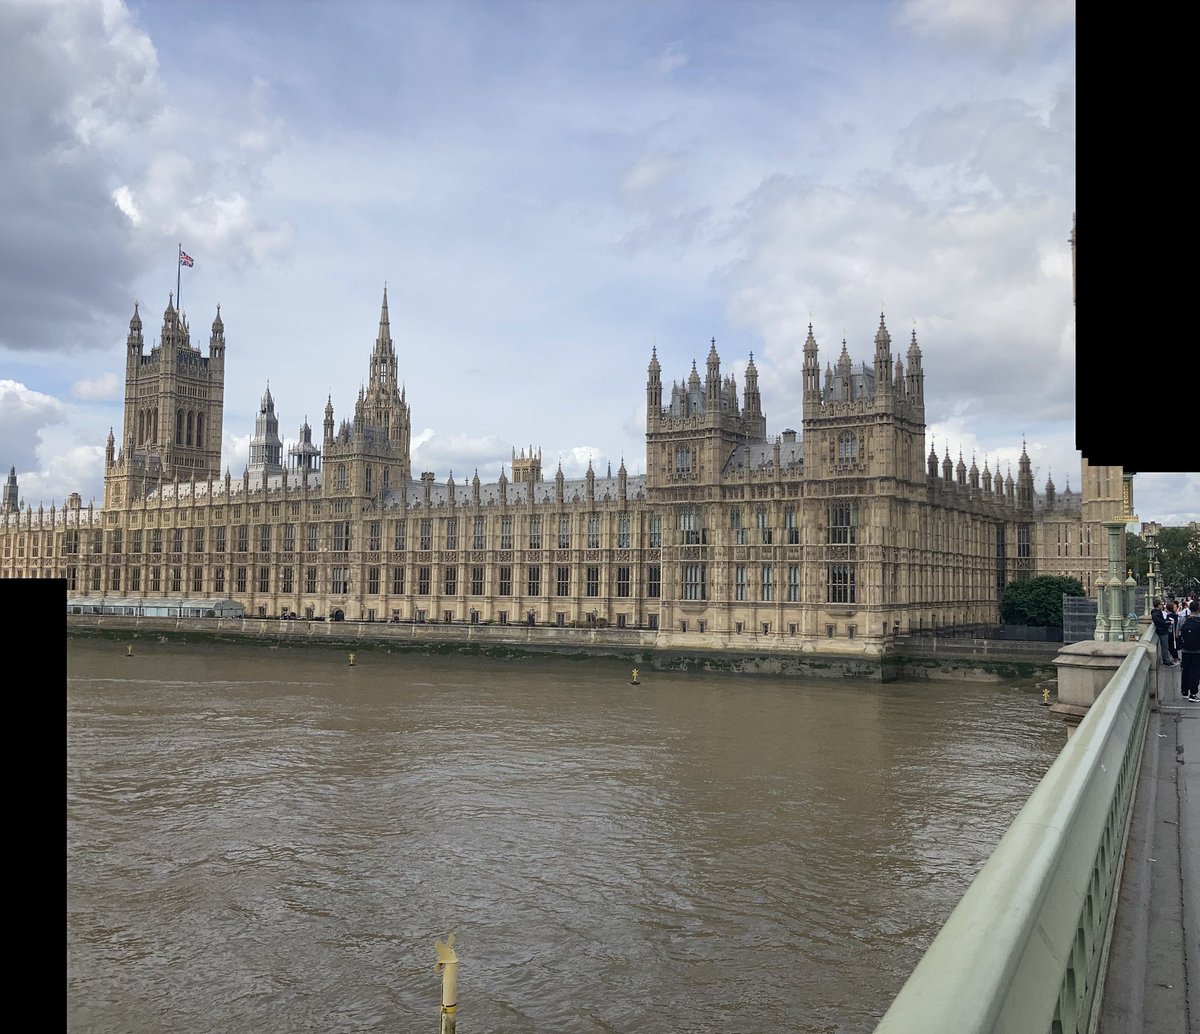 @garystreeterSWD @MarkGilmore3000: Thank you for having me at the Houses of Parliament this week for my work experience . It was extremely insightful and enjoyable.